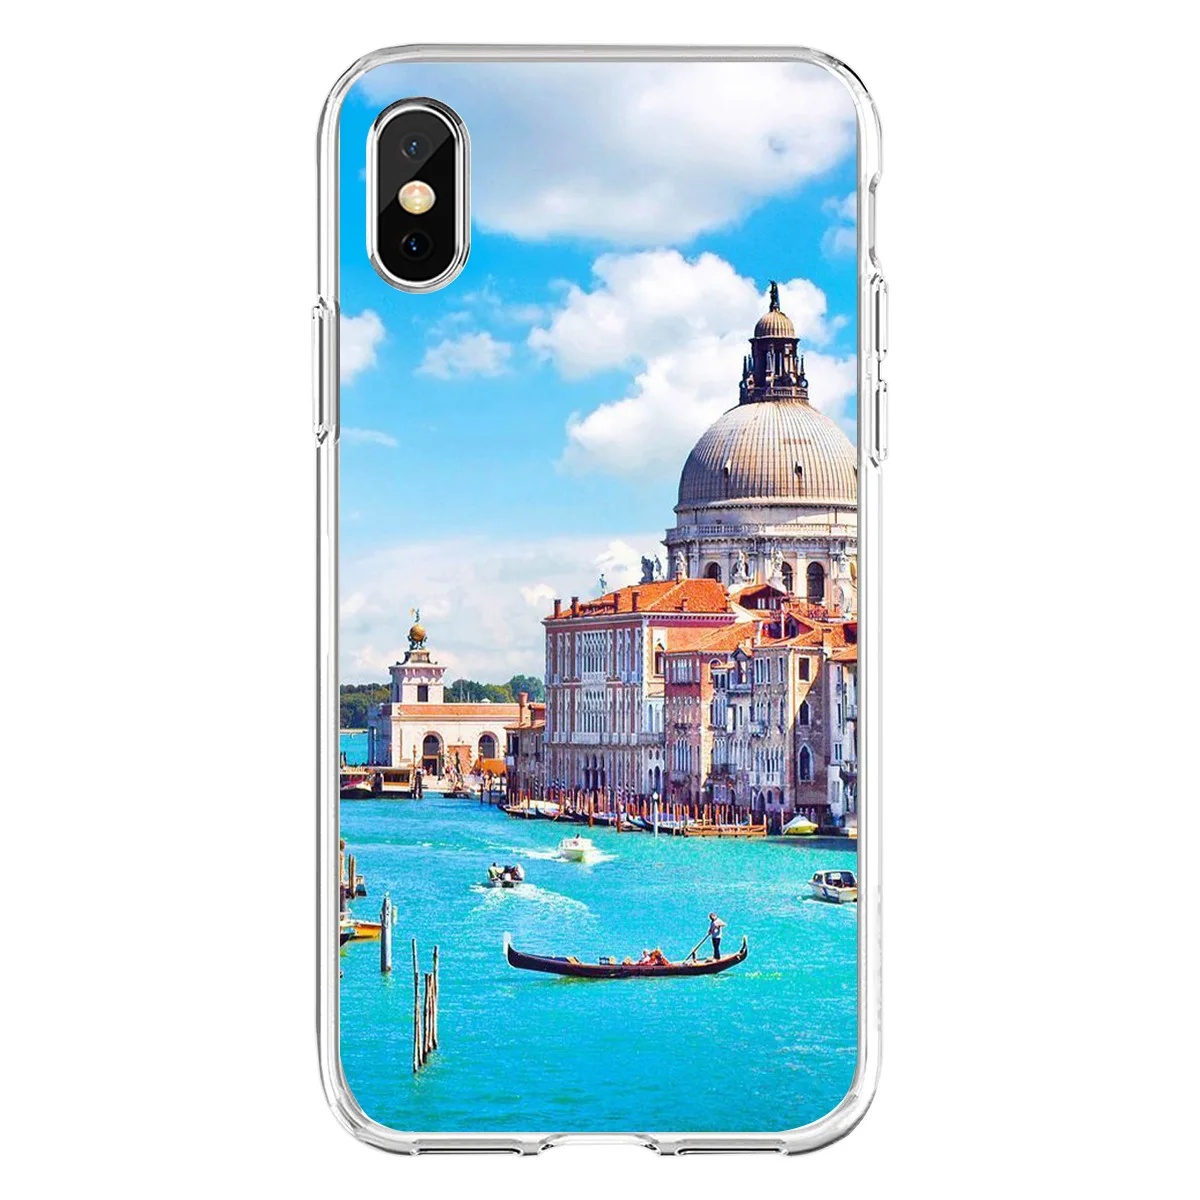 

Fashion Eiffel Tower Scenery Big Ben Phone Case Back Cover Custom Logo for Iphone 12pro max 11, Customised